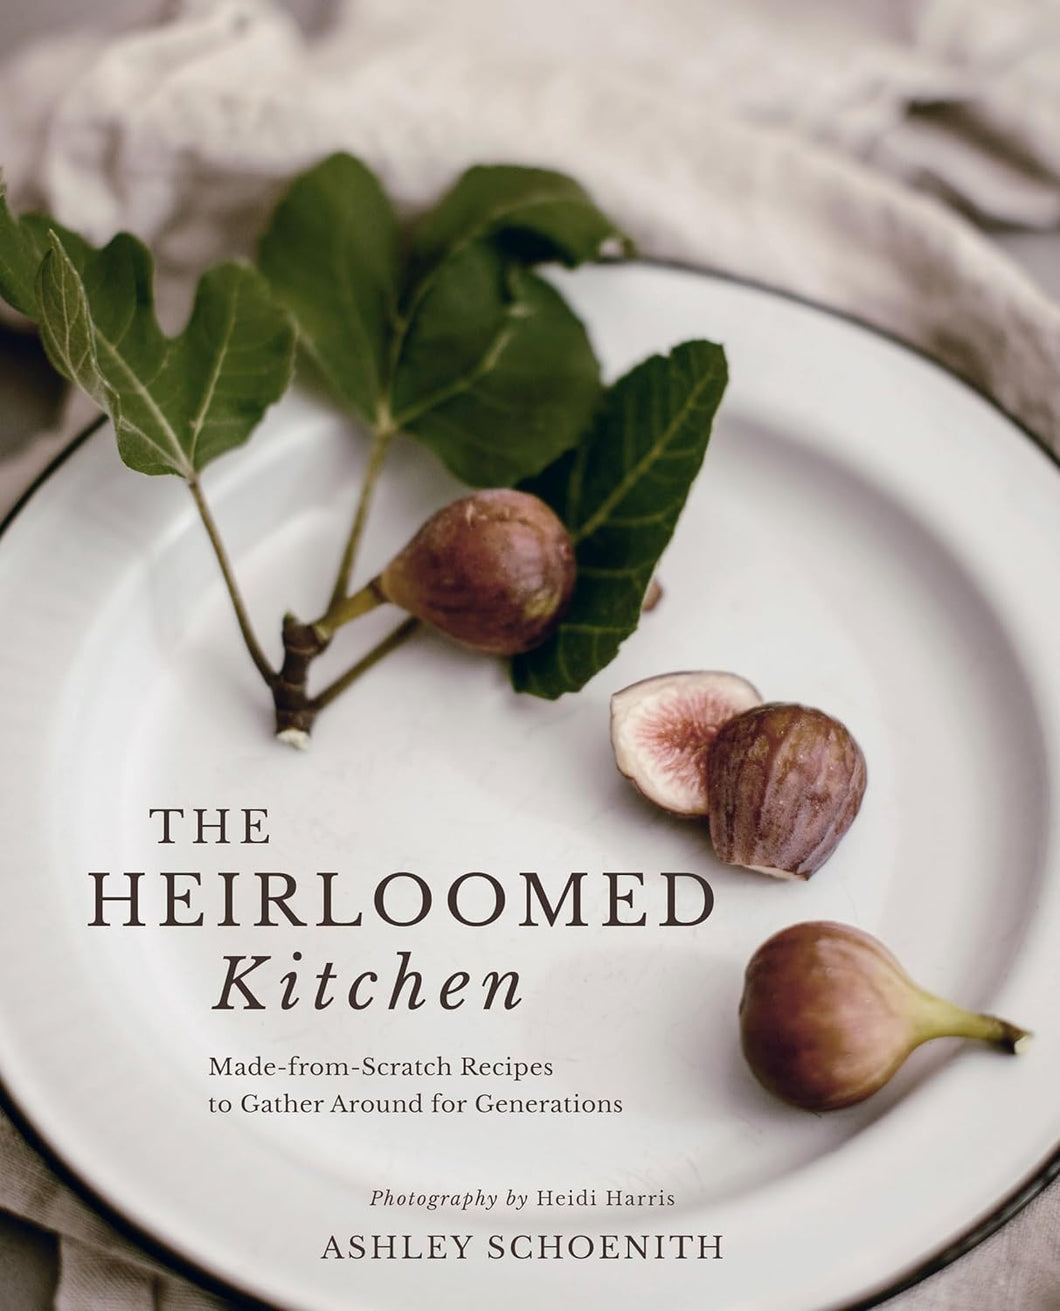 The Heirloomed Kitchen: Made-from-Scratch Recipes to Gather Around for Generations by Ashley Schoenith